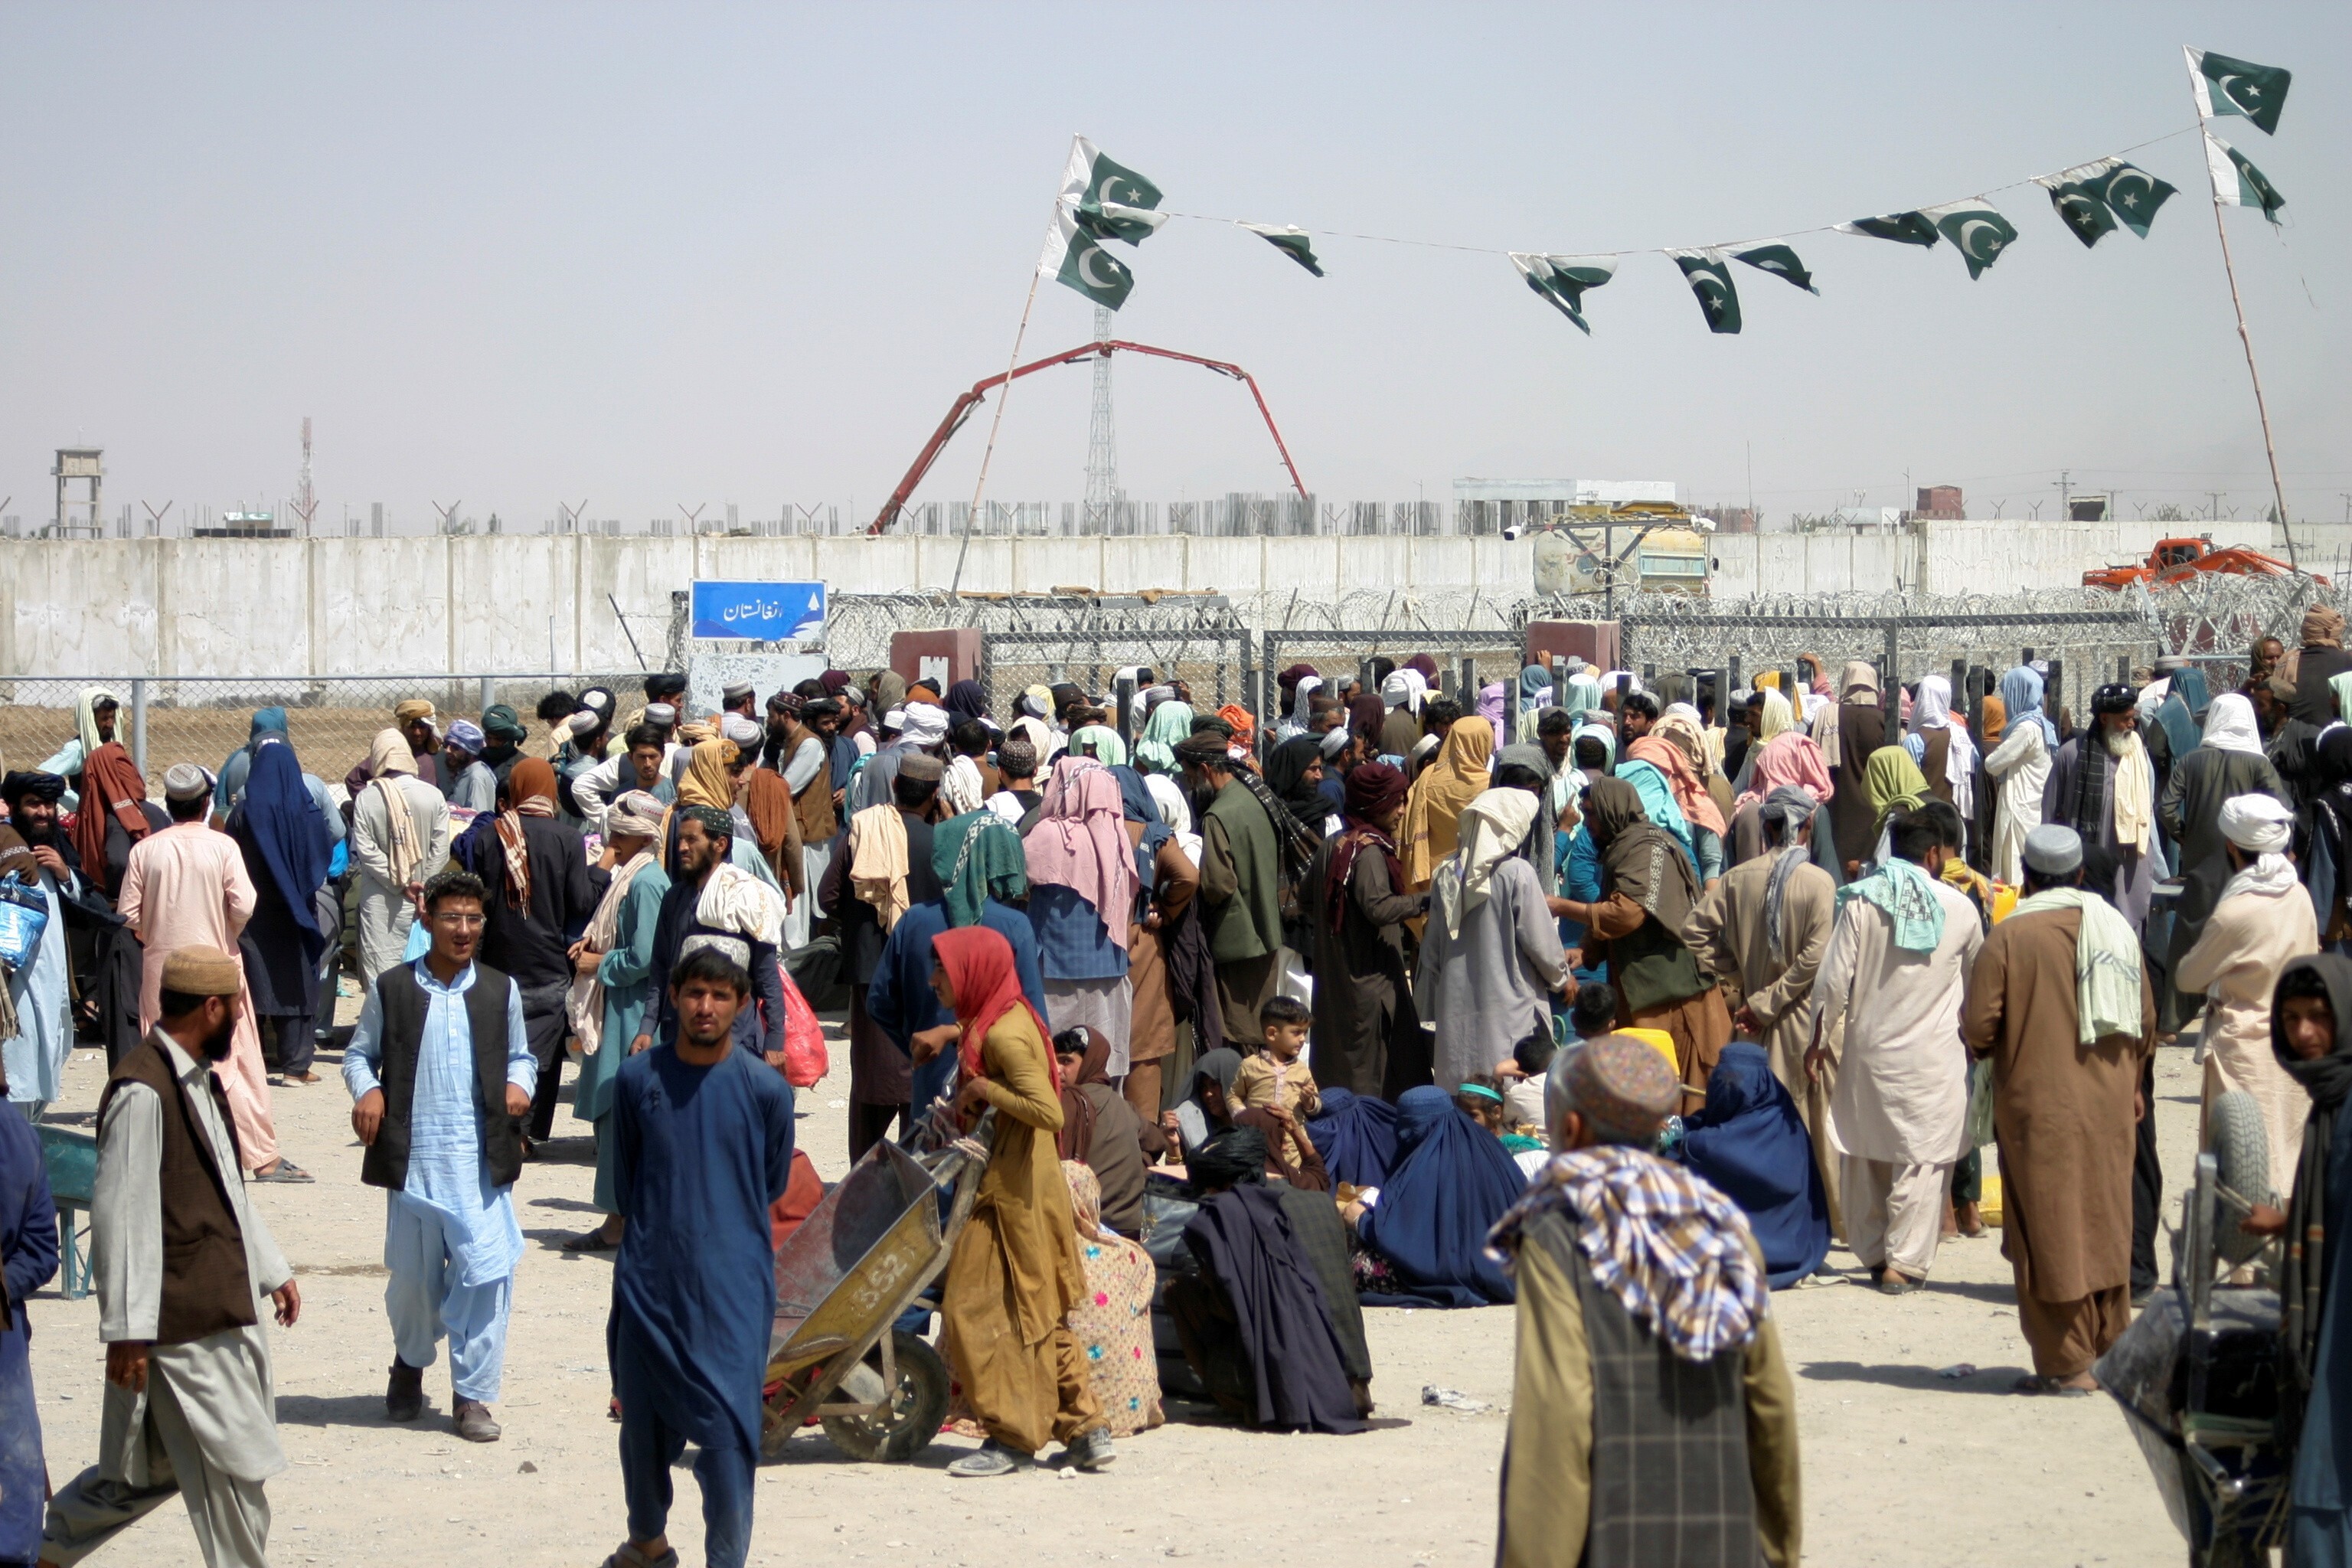 People gather to cross into Afghanistan at the Friendship Gate crossing point at the Pakistan-Afghanistan border town of Chaman, Pakistan, on Thursday. Photo: Reuters